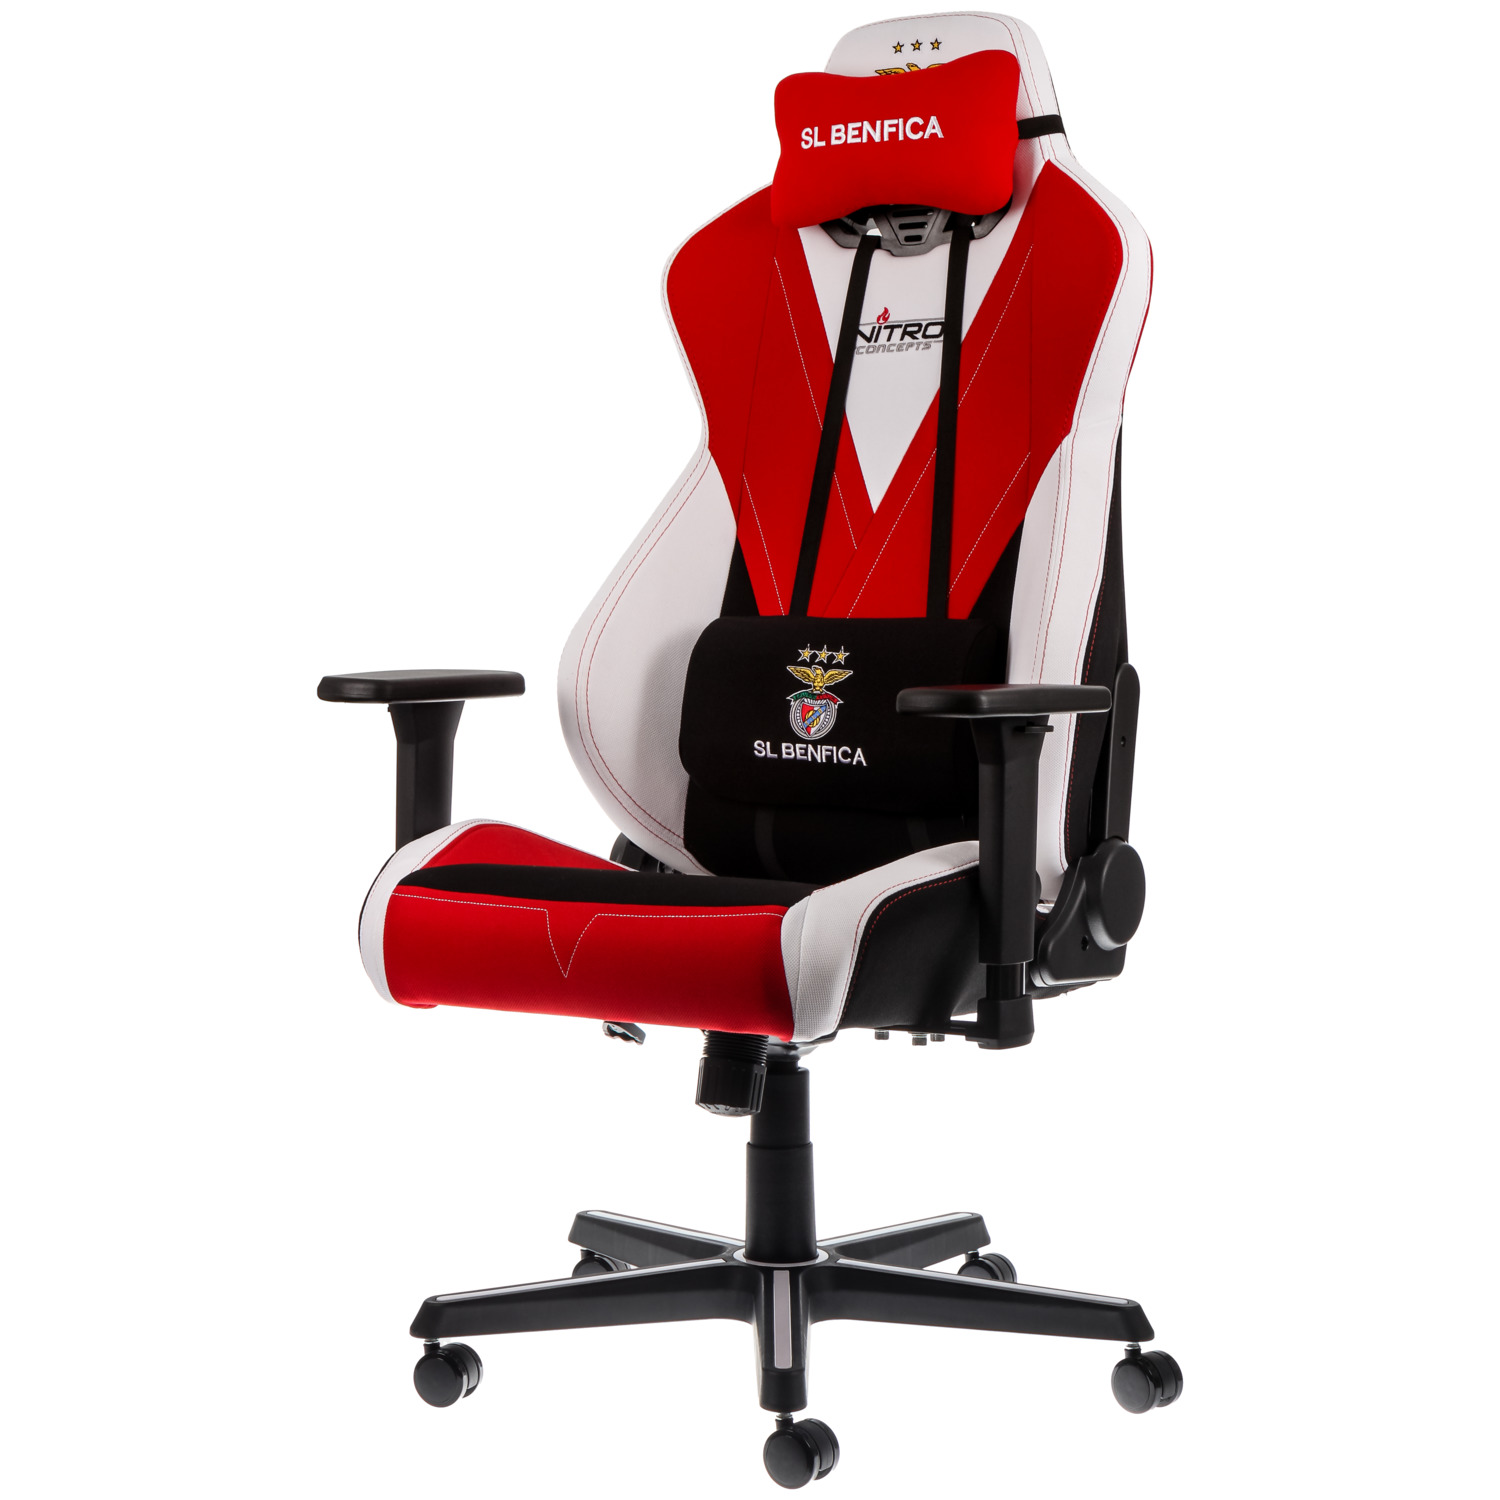 Nitro Concepts - S300 Gaming Chair - SL Benfica Edition